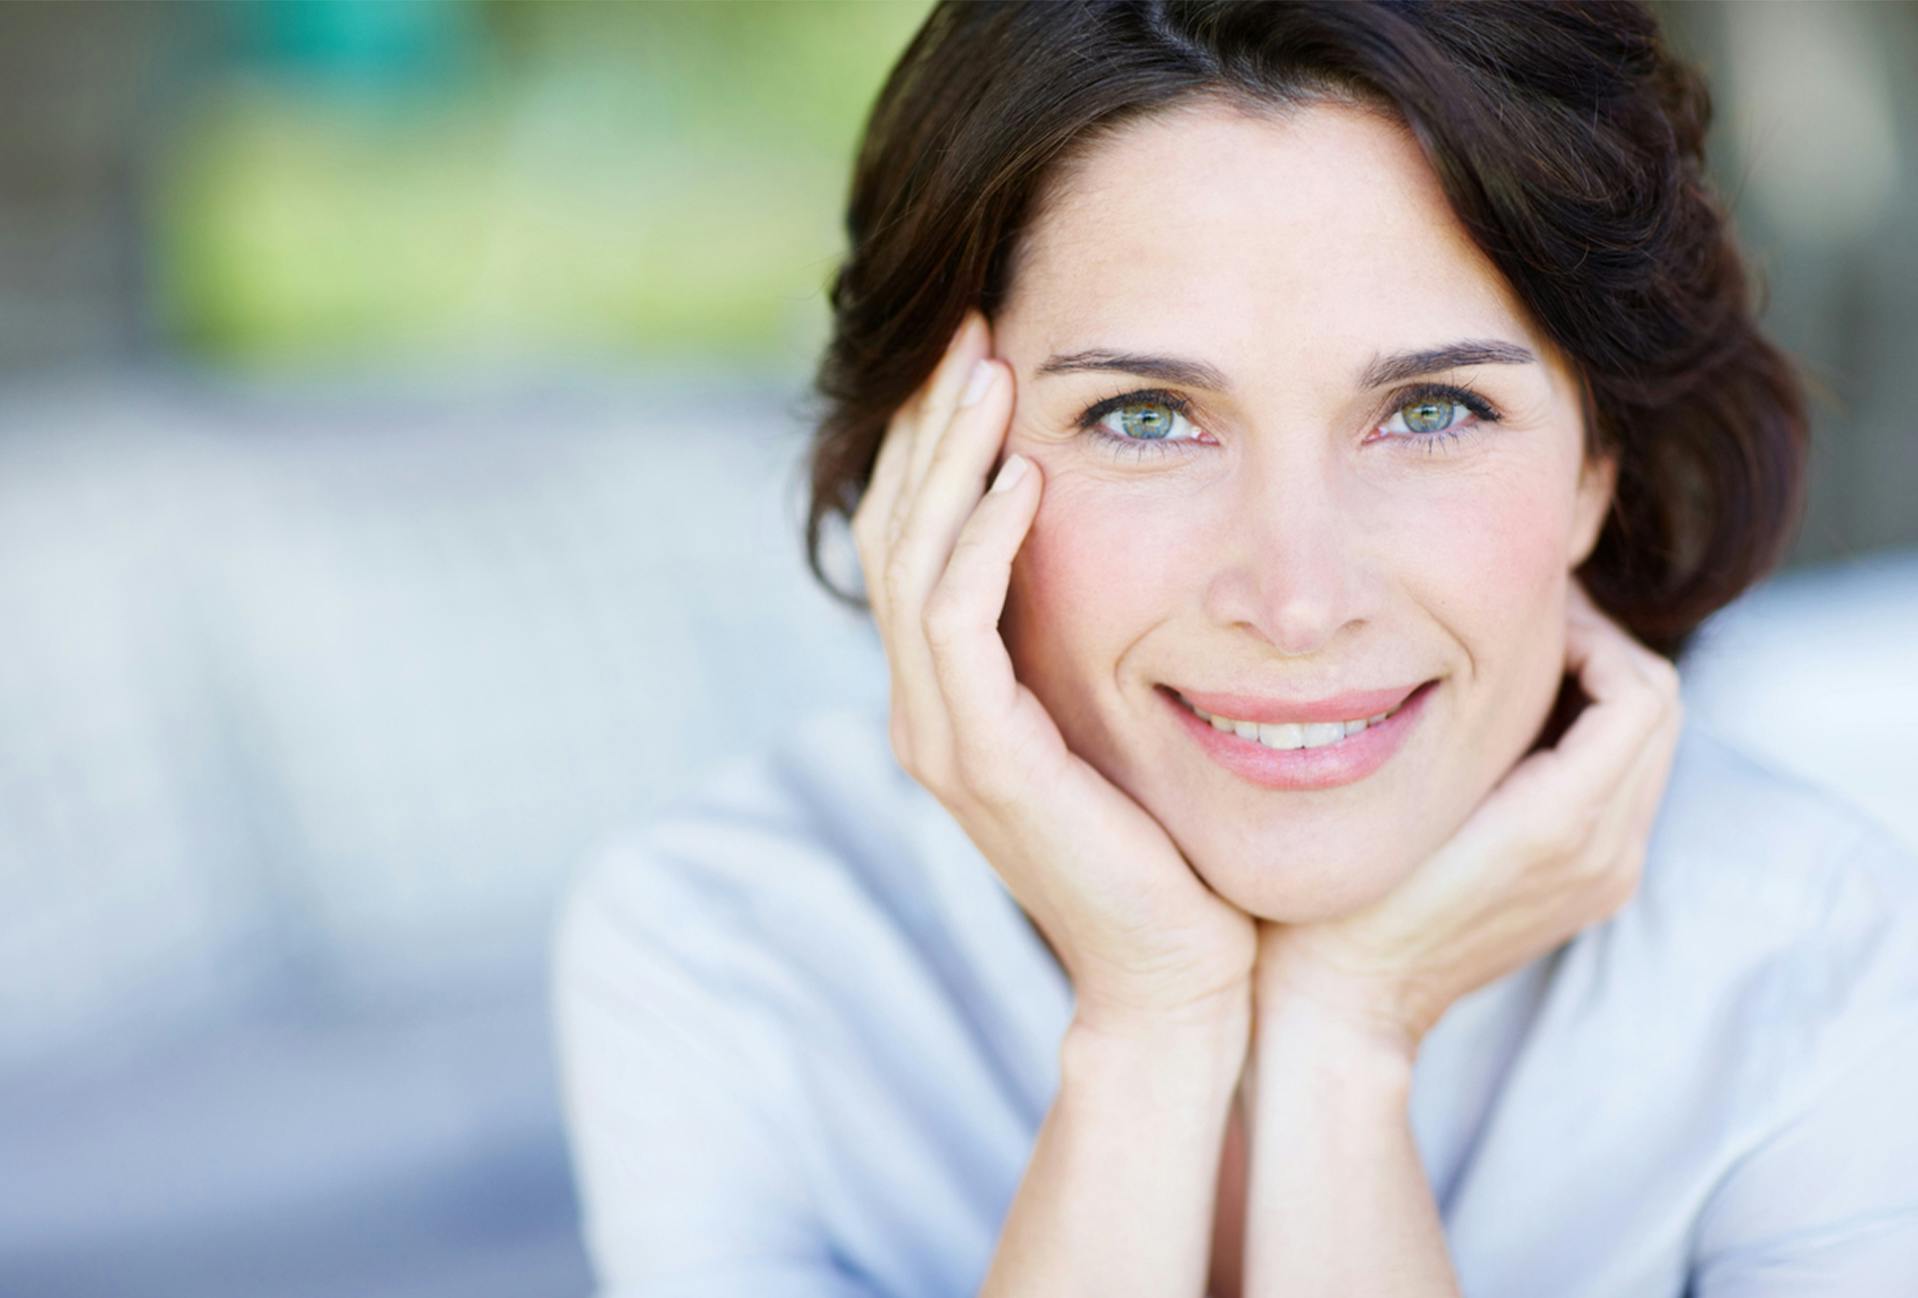 Woman with dark har smiling while resting her face on her hands